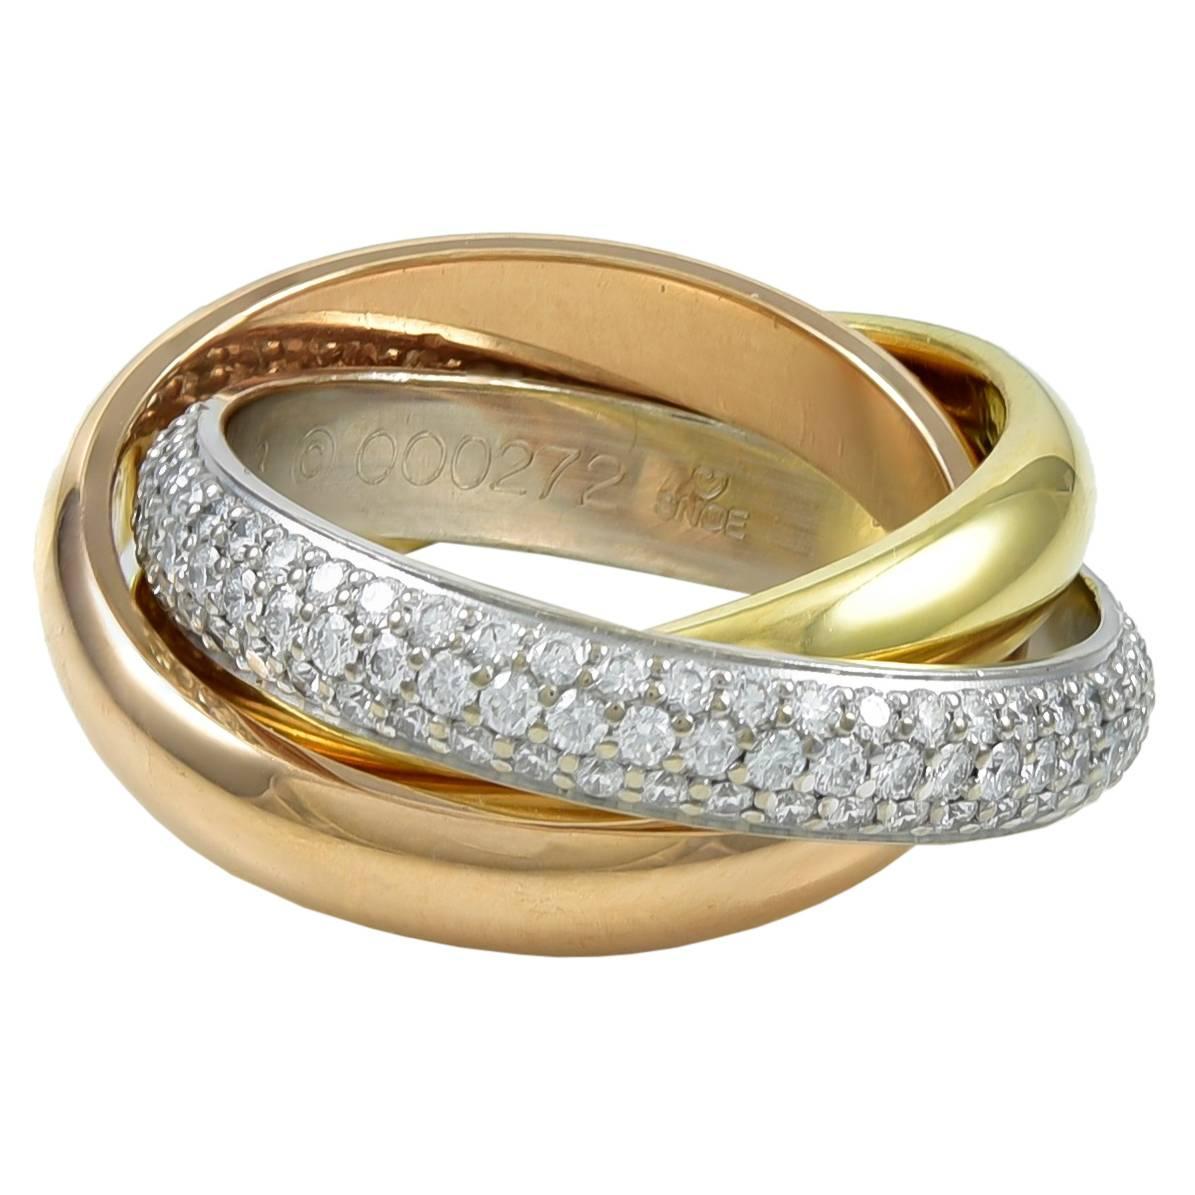 Cartier Trinity Diamond Gold Ring For Sale at 1stdibs